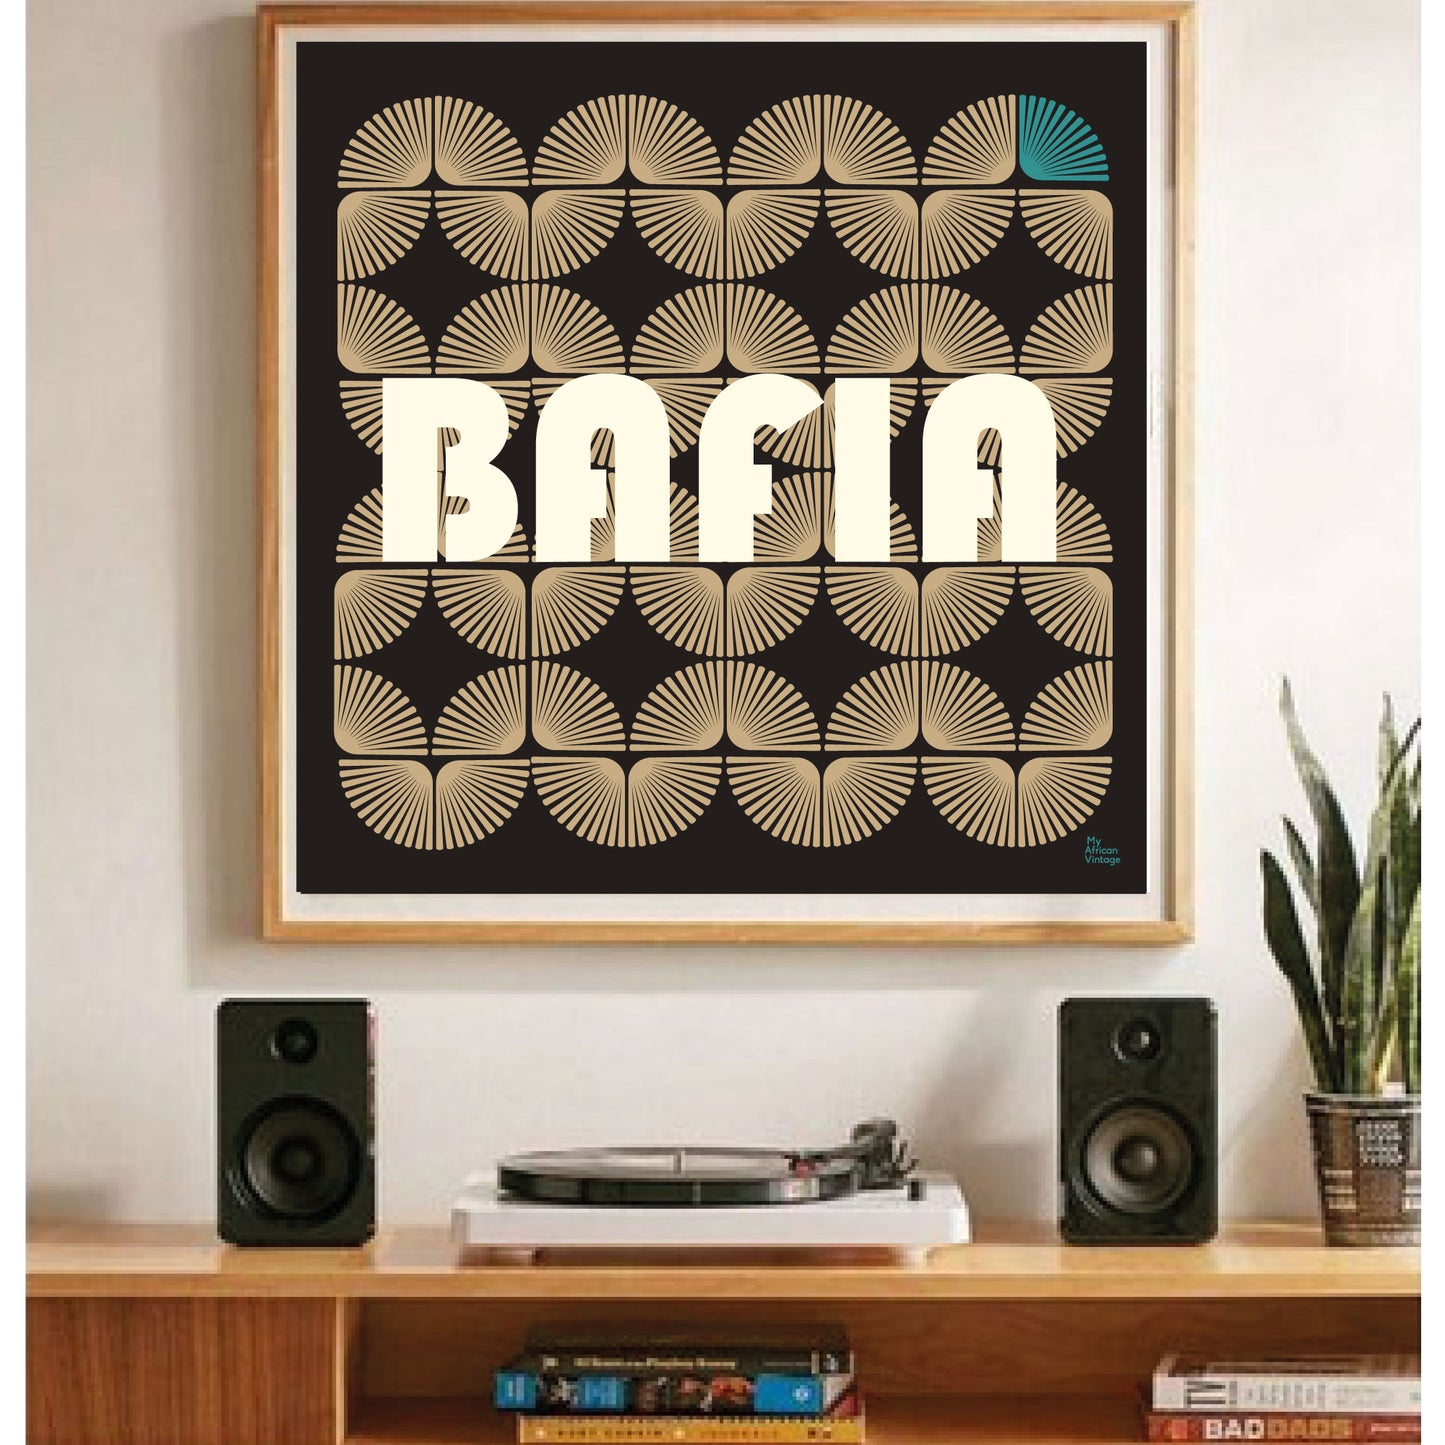 "Bafia" retro style poster  - "My African Vintage" collection